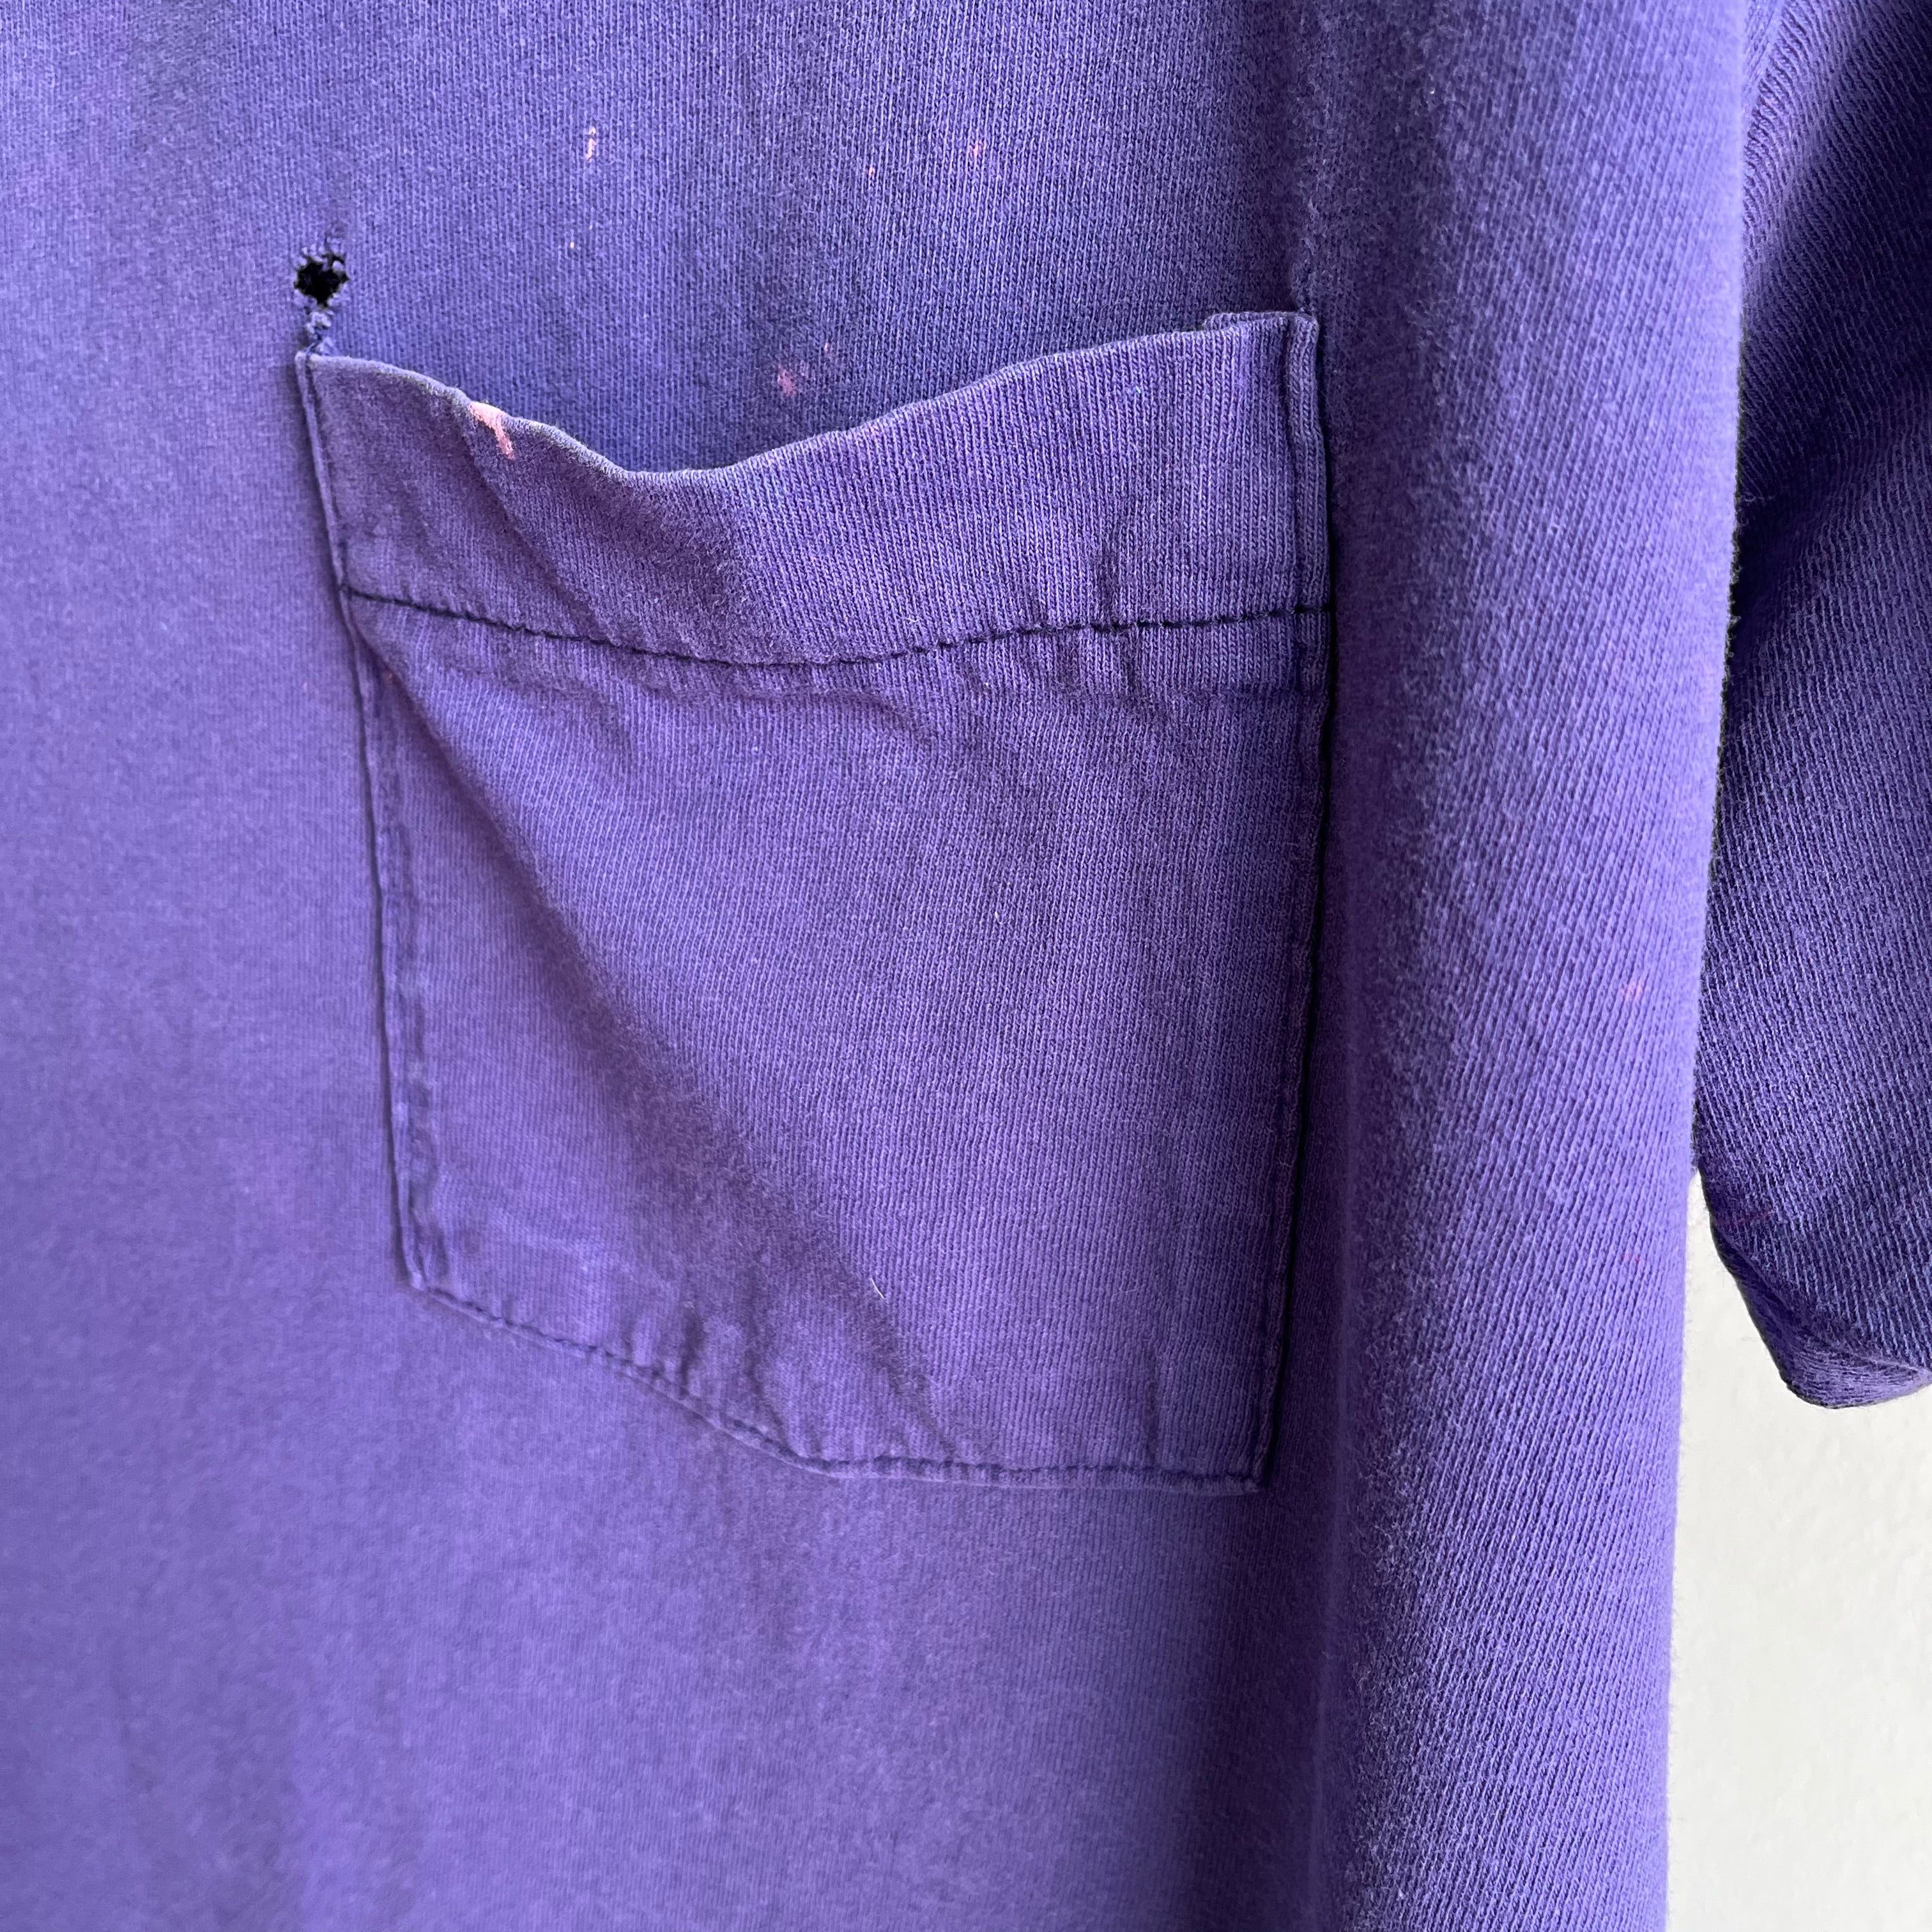 1980s Perfectly Worn and Bleach Stained Purple Single Stitch Selvedge Pocket T-Shirt